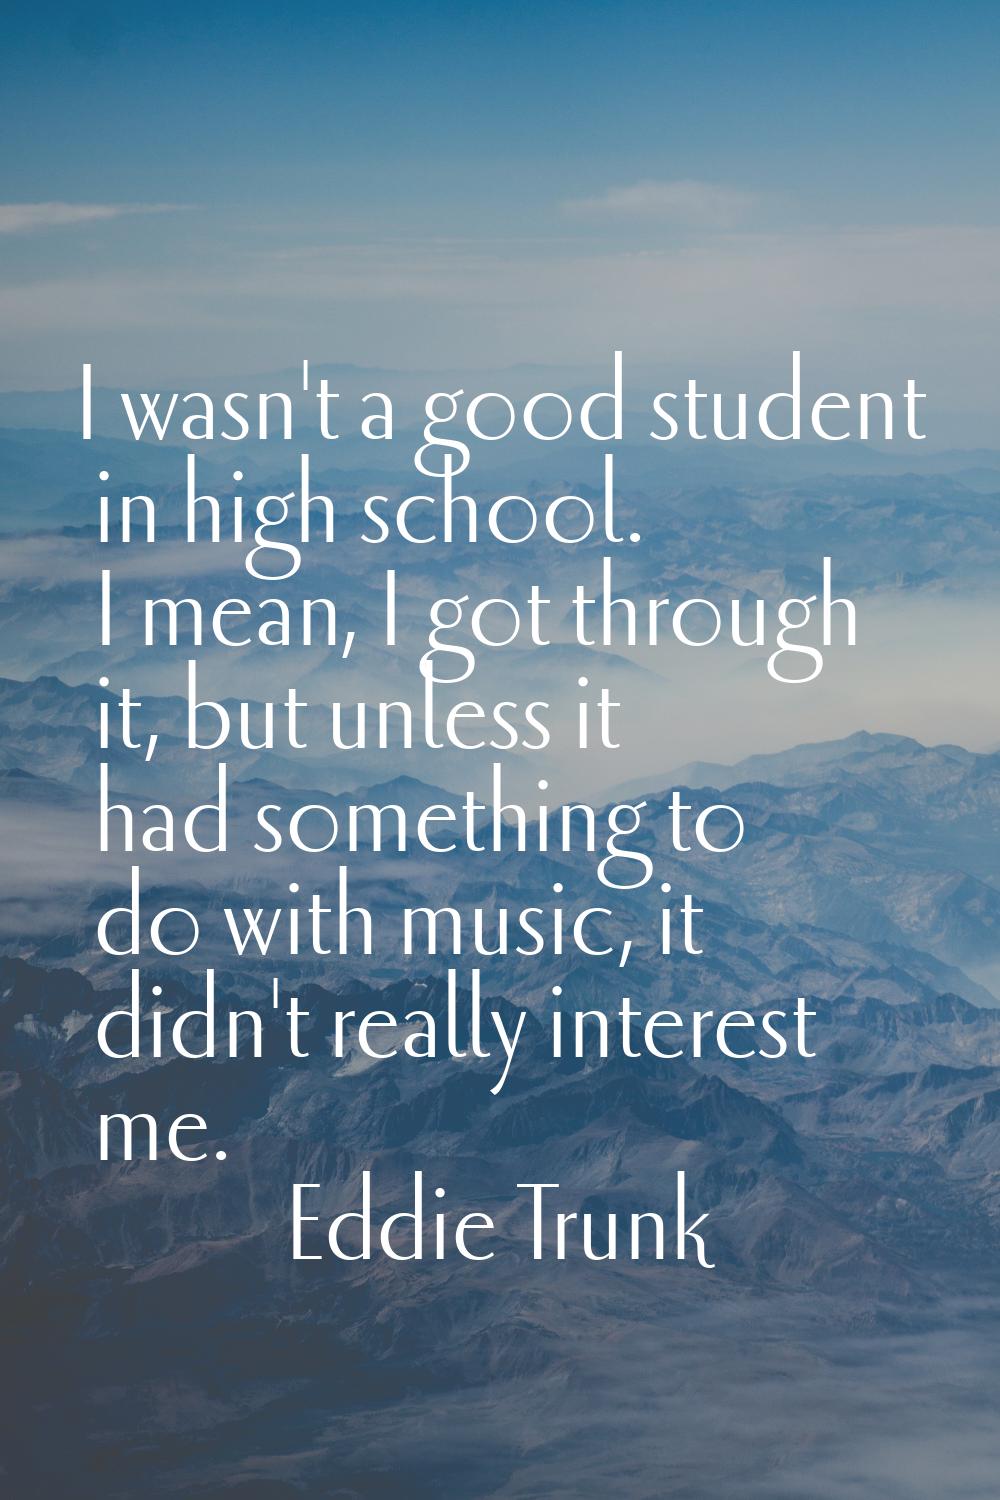 I wasn't a good student in high school. I mean, I got through it, but unless it had something to do